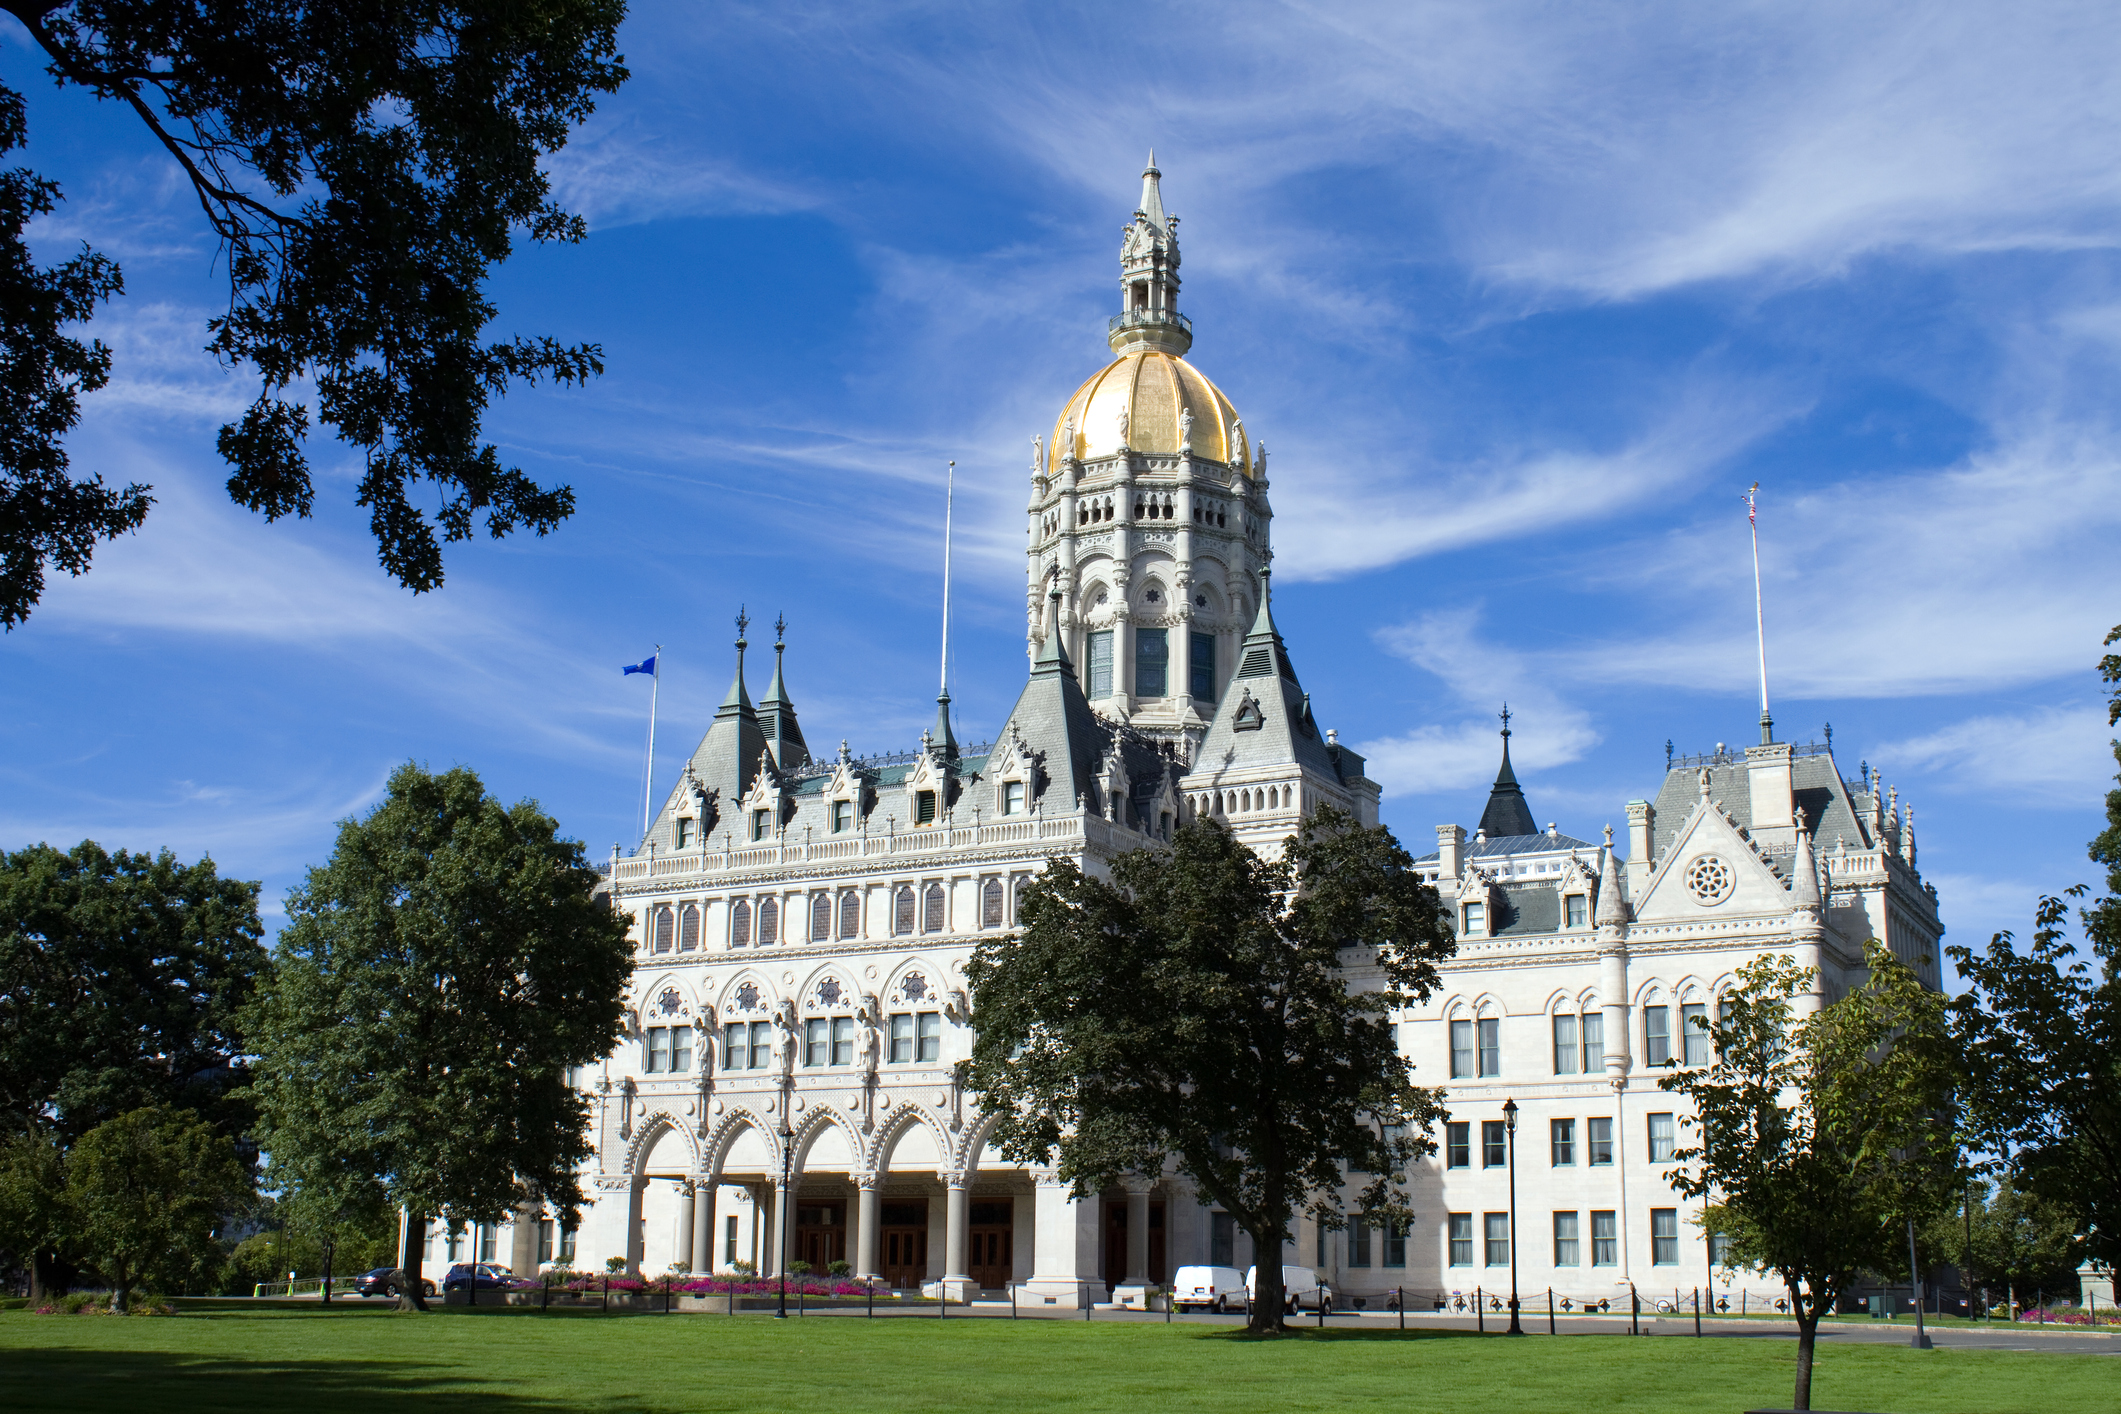 Settle in on a Budget: Top Free Things to Do in Hartford, CT